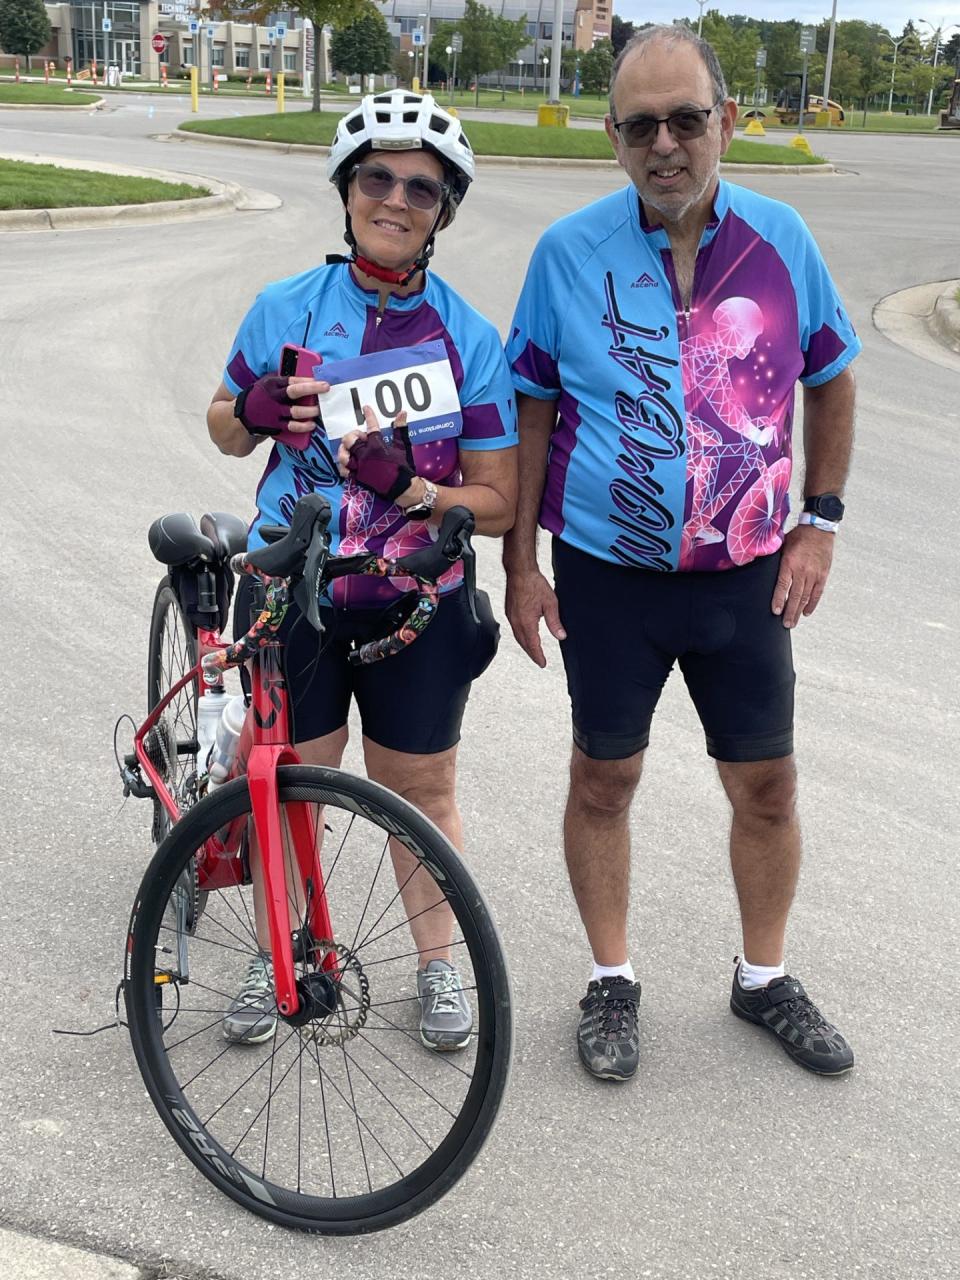 Cousins Ruth Fry of Port Huron and Brian Gable of Westland were among the participants at Saturday's Cornerstone 100 Lake Erie Bicycle Tour.
"It has been a goal of theirs to ride 100 miles. They achieved their goal," Florence Buchanan, one of the event organizers, said.